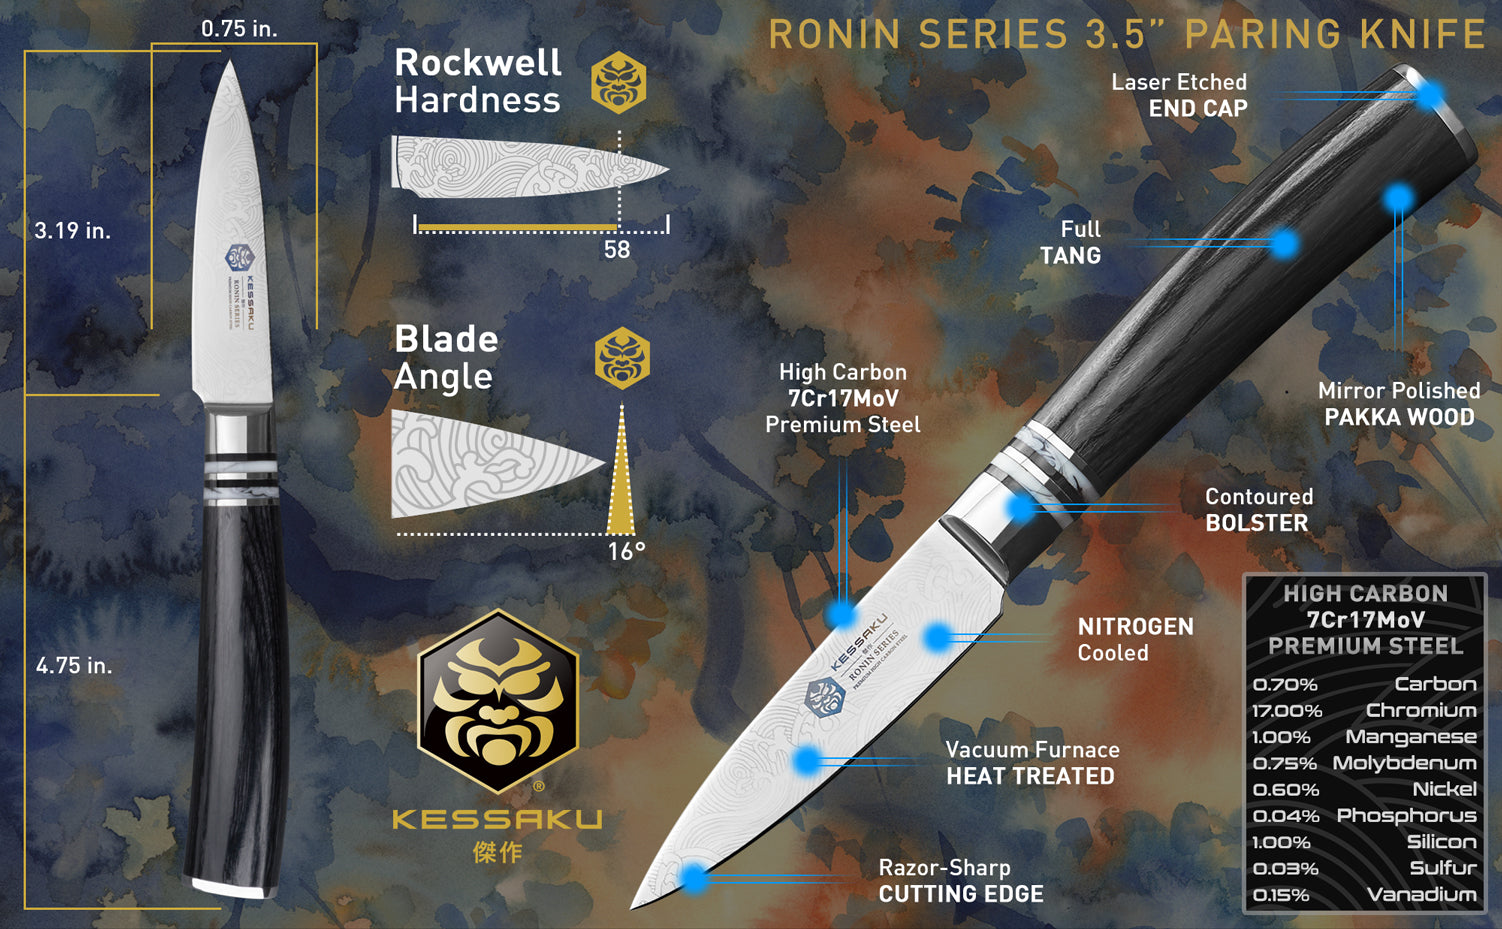 The Kessaku Ronin Series 3.5-Inch Paring Knife's features, dimensions, and steel composition